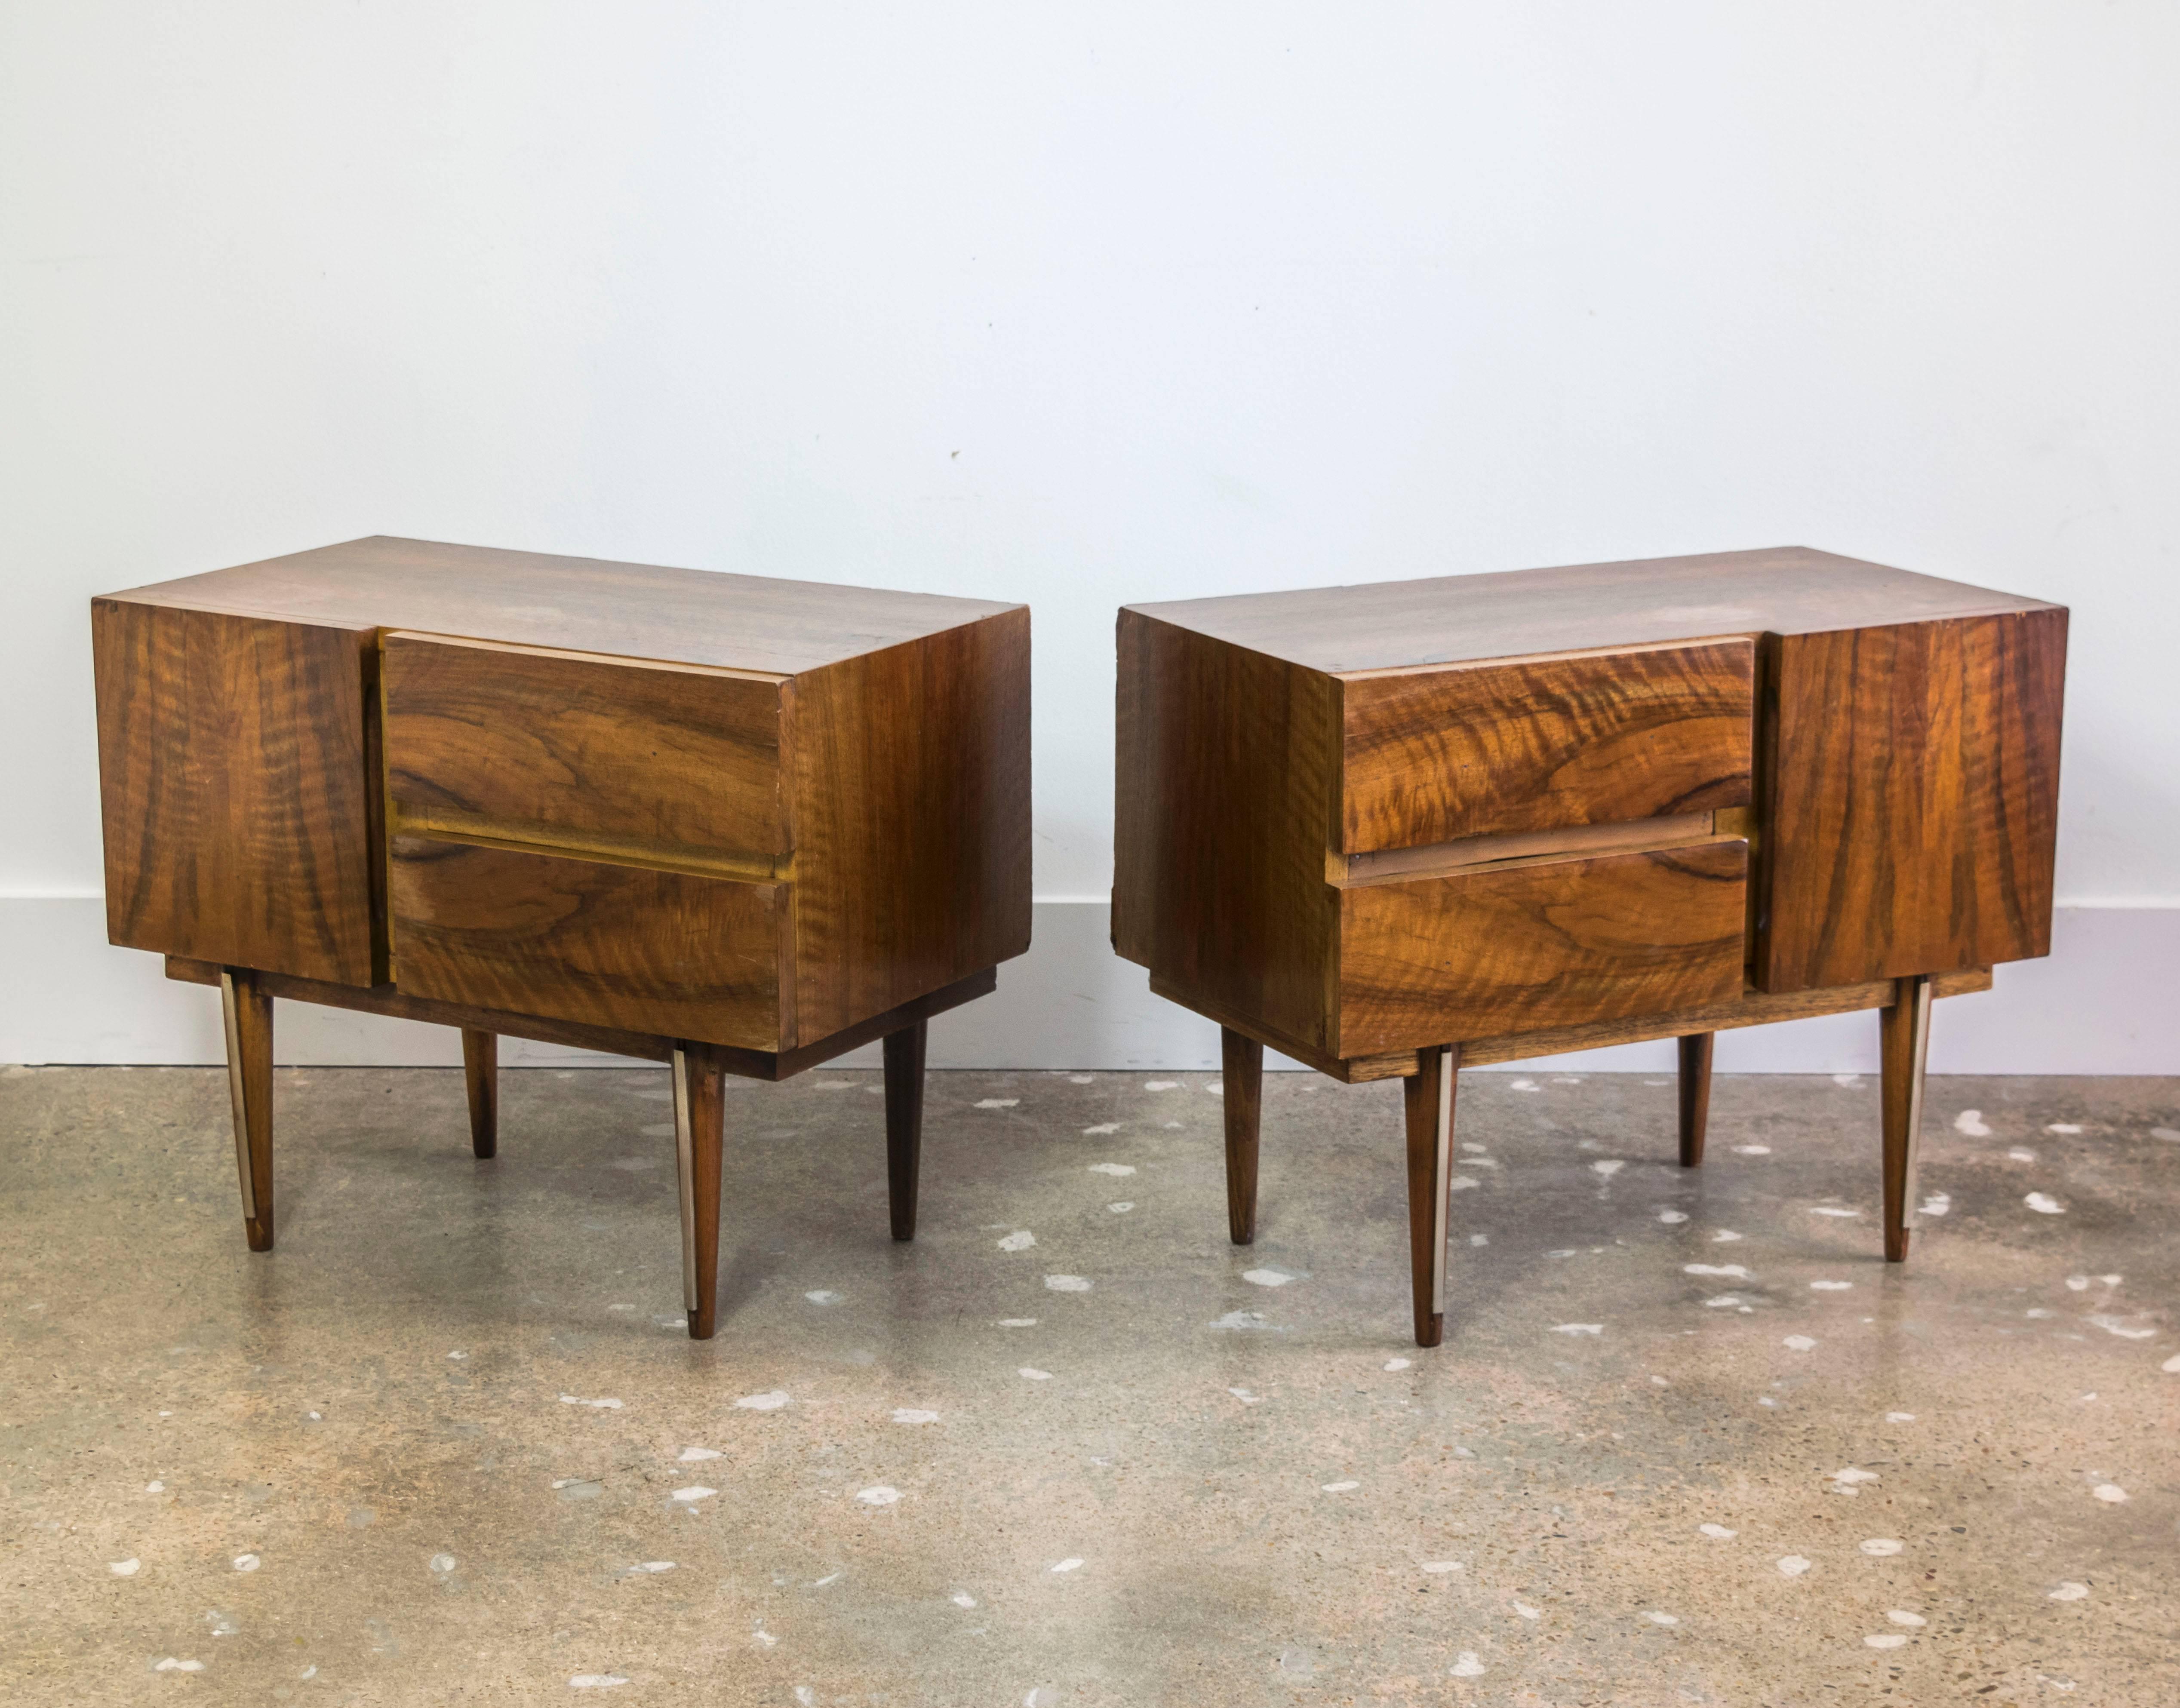 Rosewood bedside tables with brass detailing on the legs, each has two drawers and a separate cubicle space.